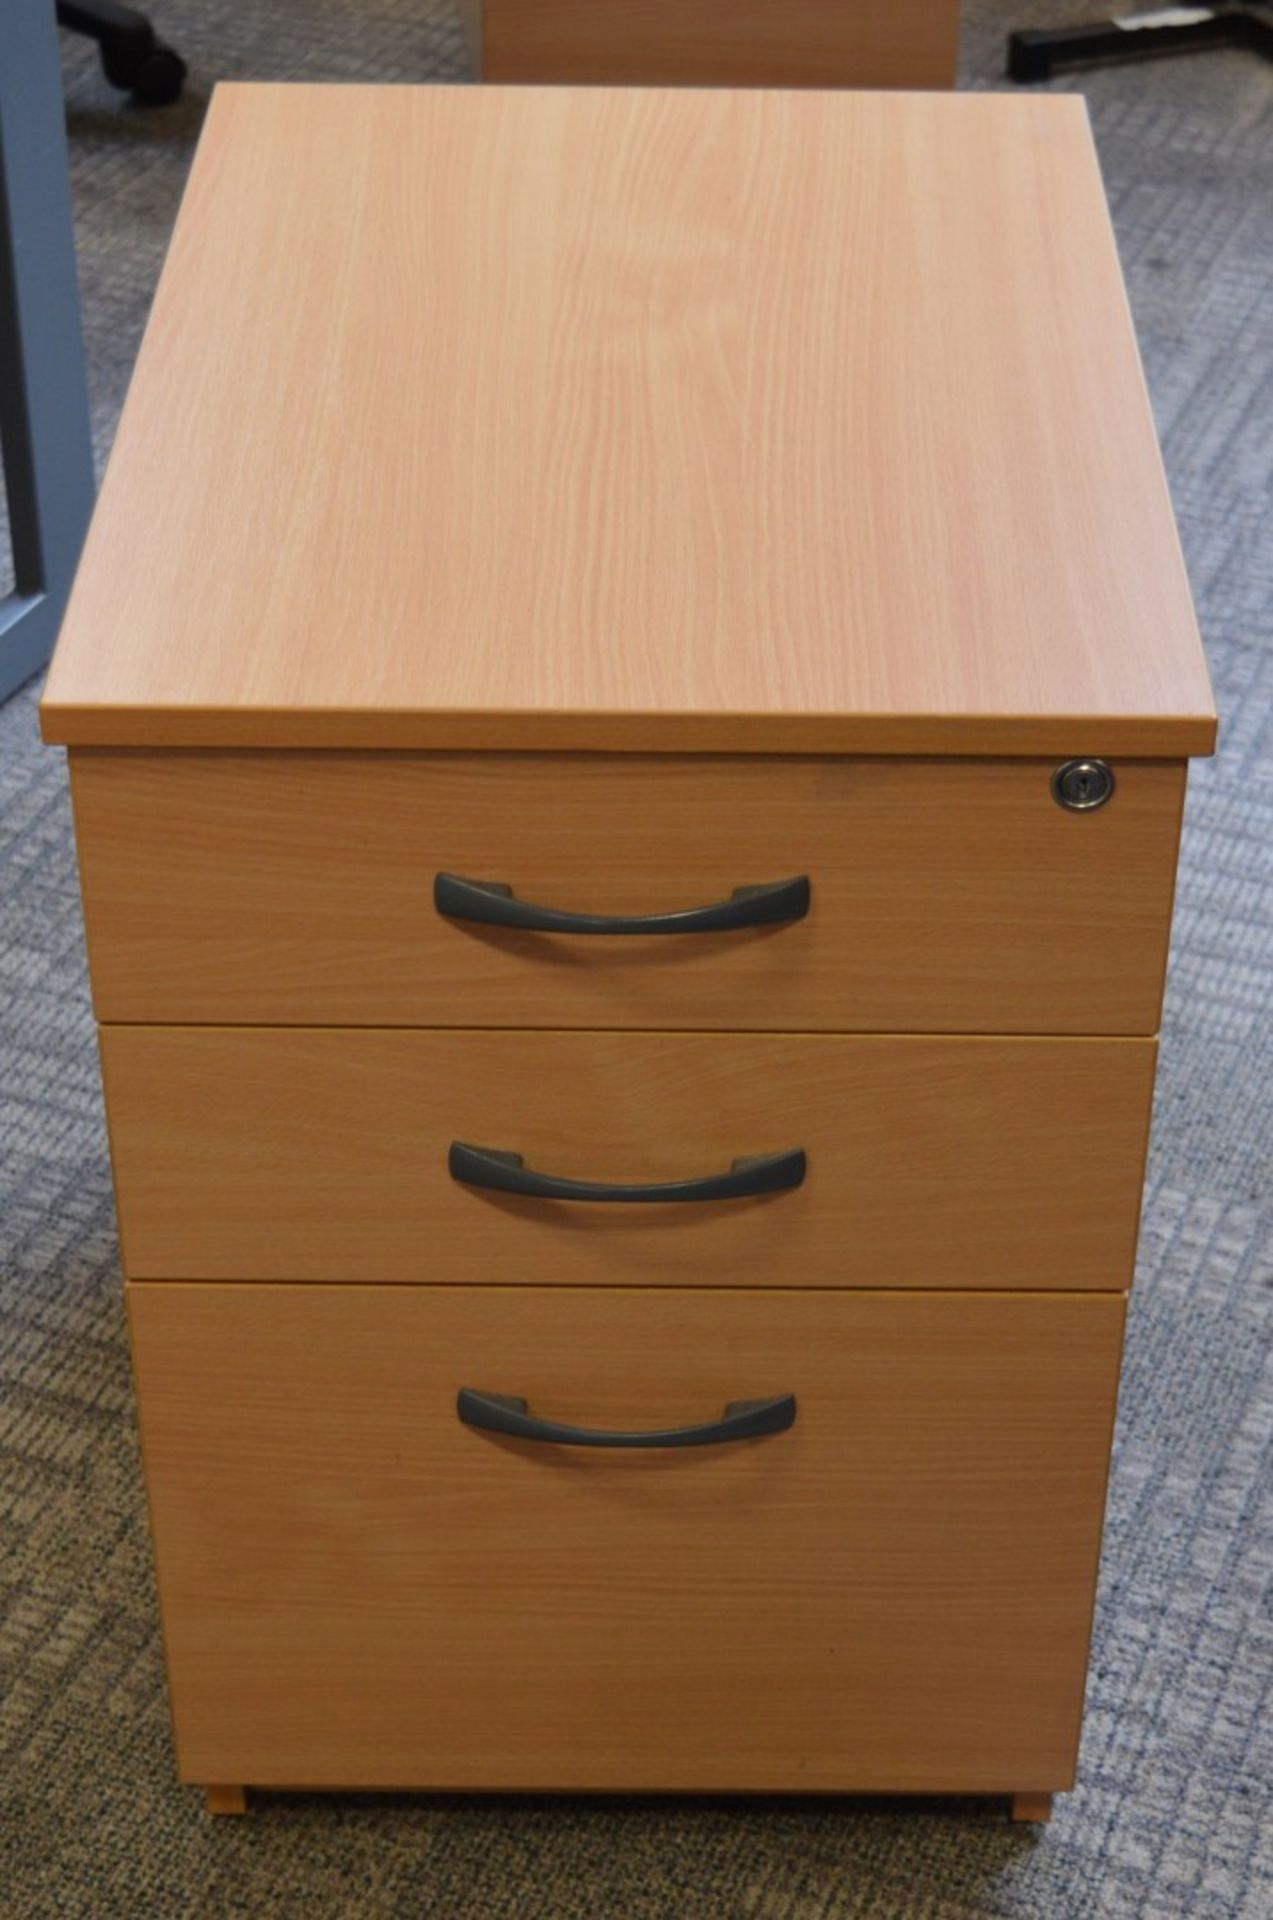 1 x Three Drawer Mobile Pedestal Drawers - With Key - Modern Beech Finish - Two Storage Drawers - Image 5 of 6